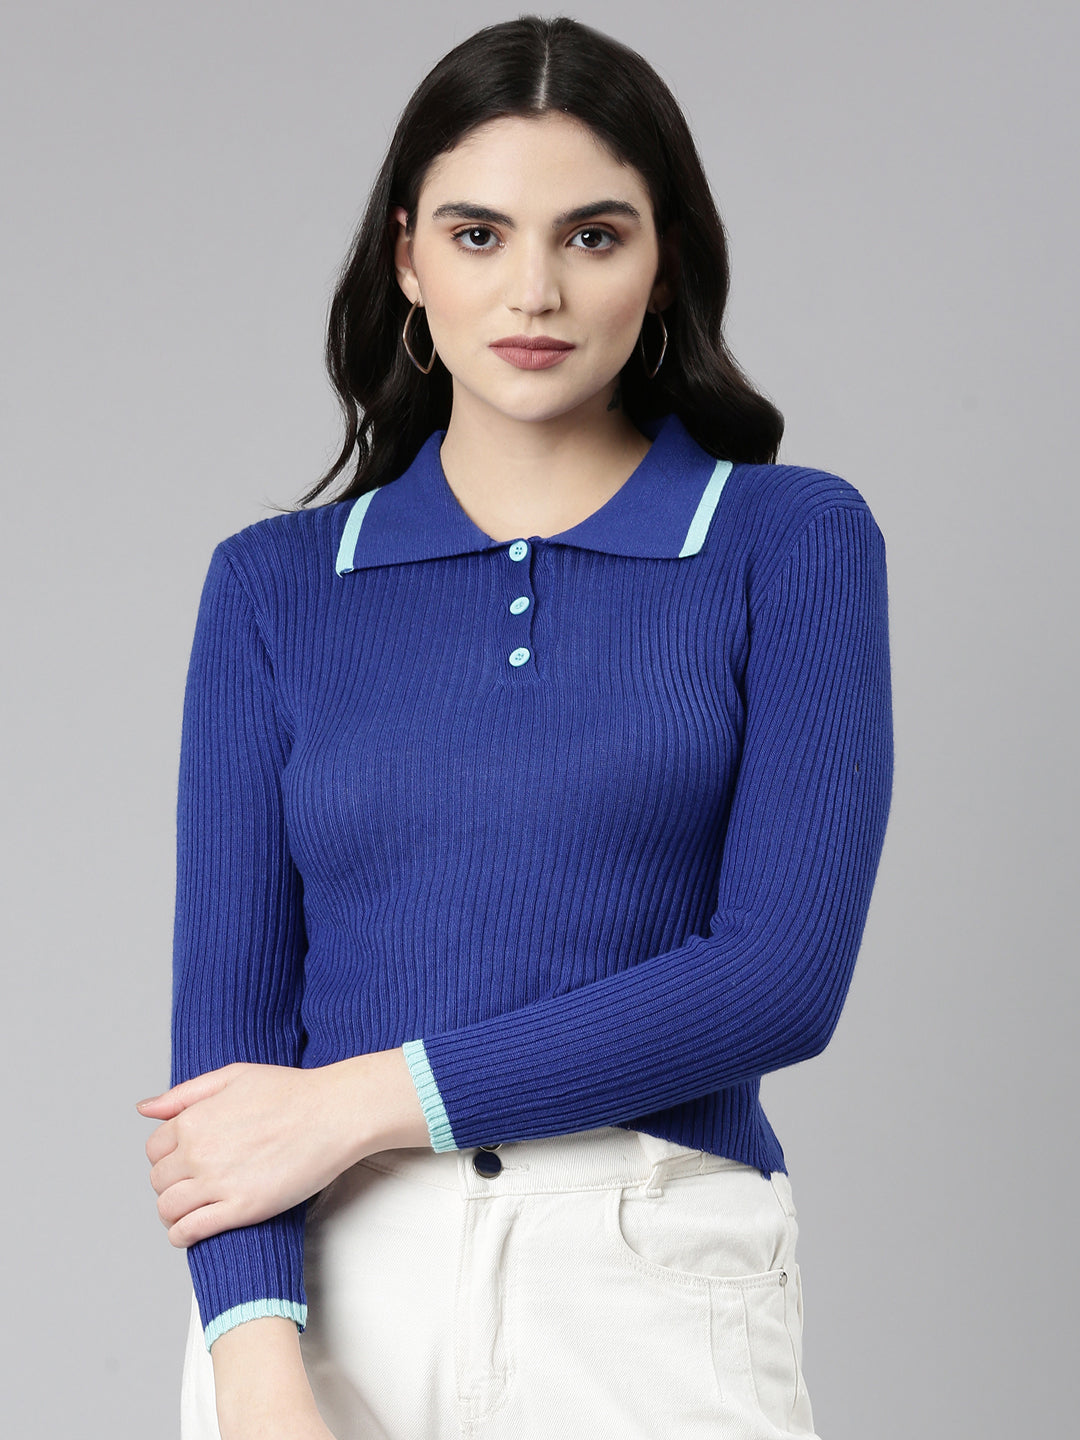 Above the Keyboard Collar Solid Regular Sleeves Fitted Blue Regular Top